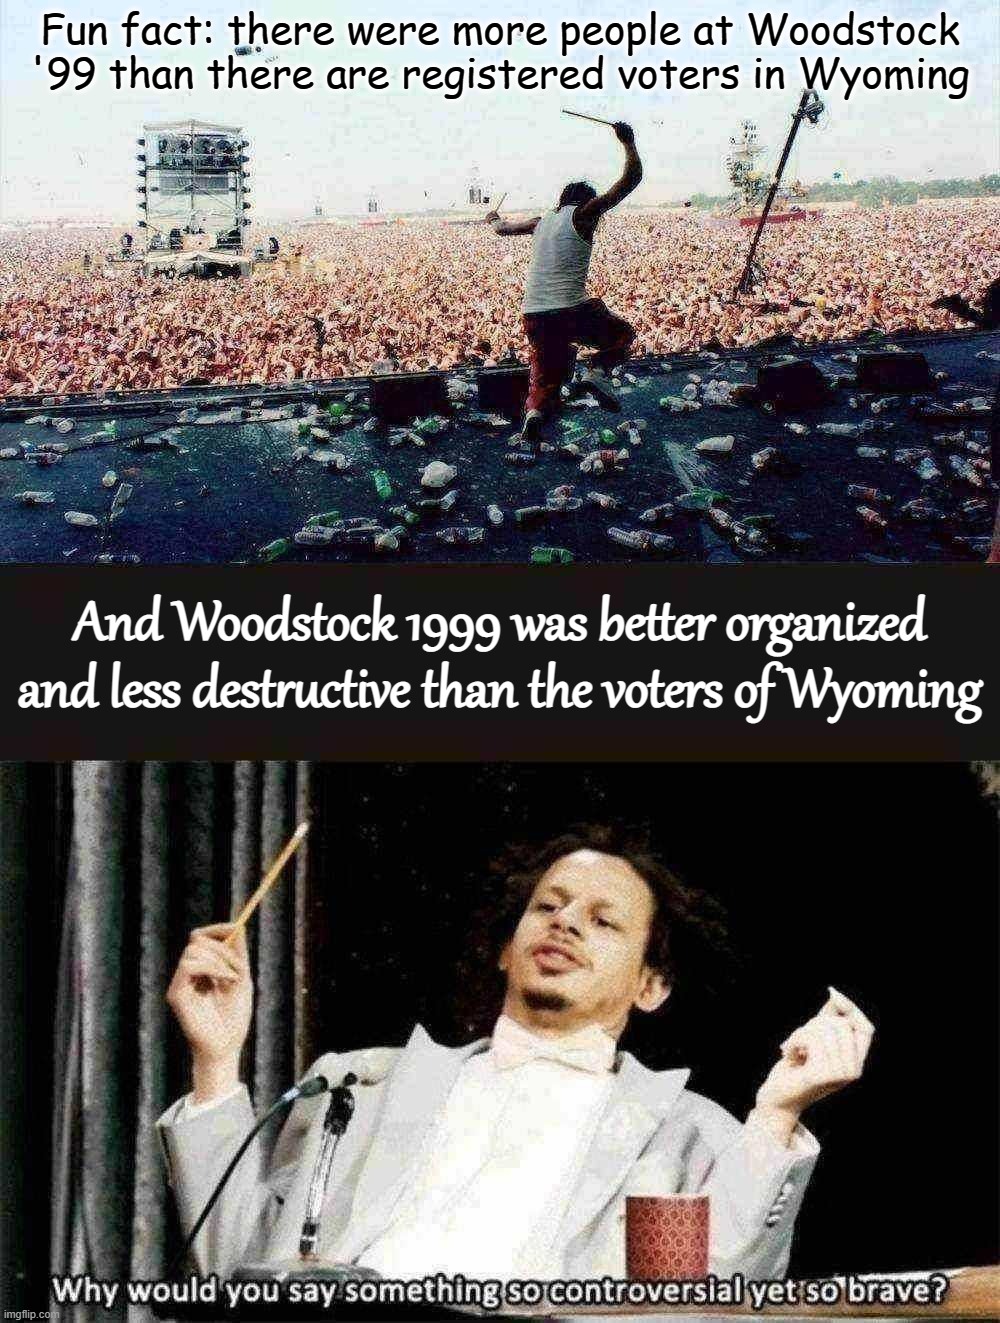 Big “burn down the establishment” energy | Fun fact: there were more people at Woodstock '99 than there are registered voters in Wyoming; And Woodstock 1999 was better organized and less destructive than the voters of Wyoming | image tagged in woodstock 1999,why would you say something so controversial yet so brave,woodstock,liz cheney,wyoming,trump supporters | made w/ Imgflip meme maker